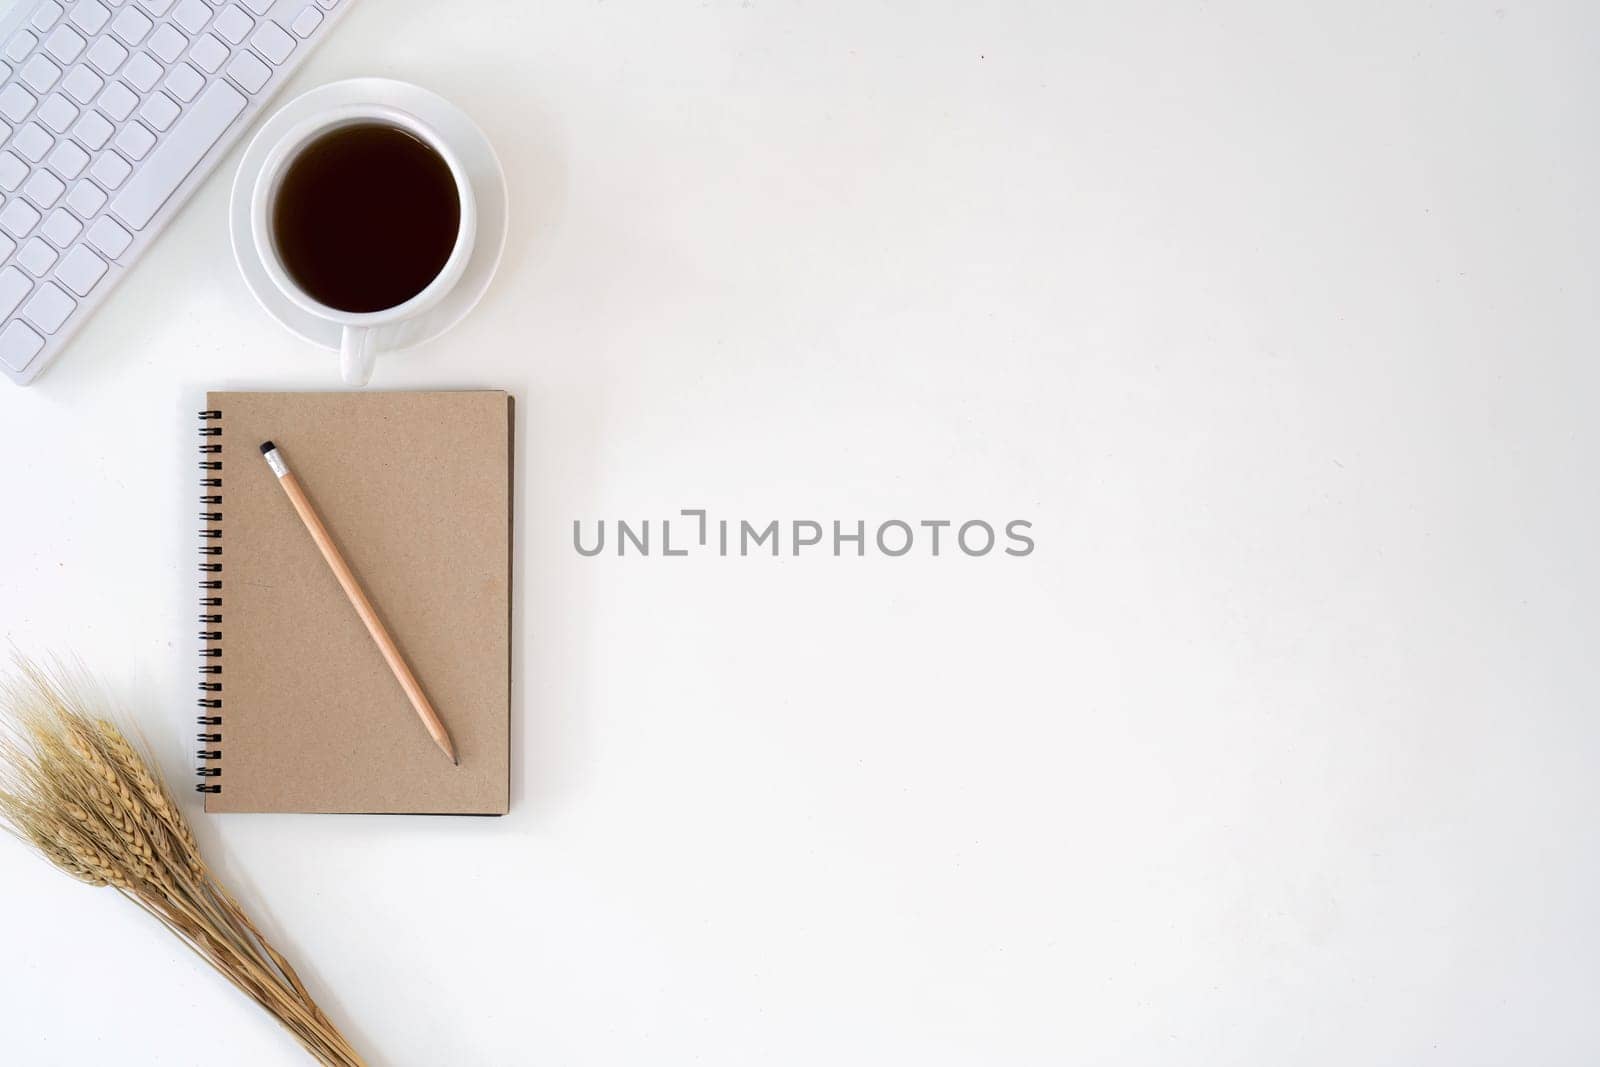 Top view with copy space for your text. keyboard, cup of coffee and notebook on white background.